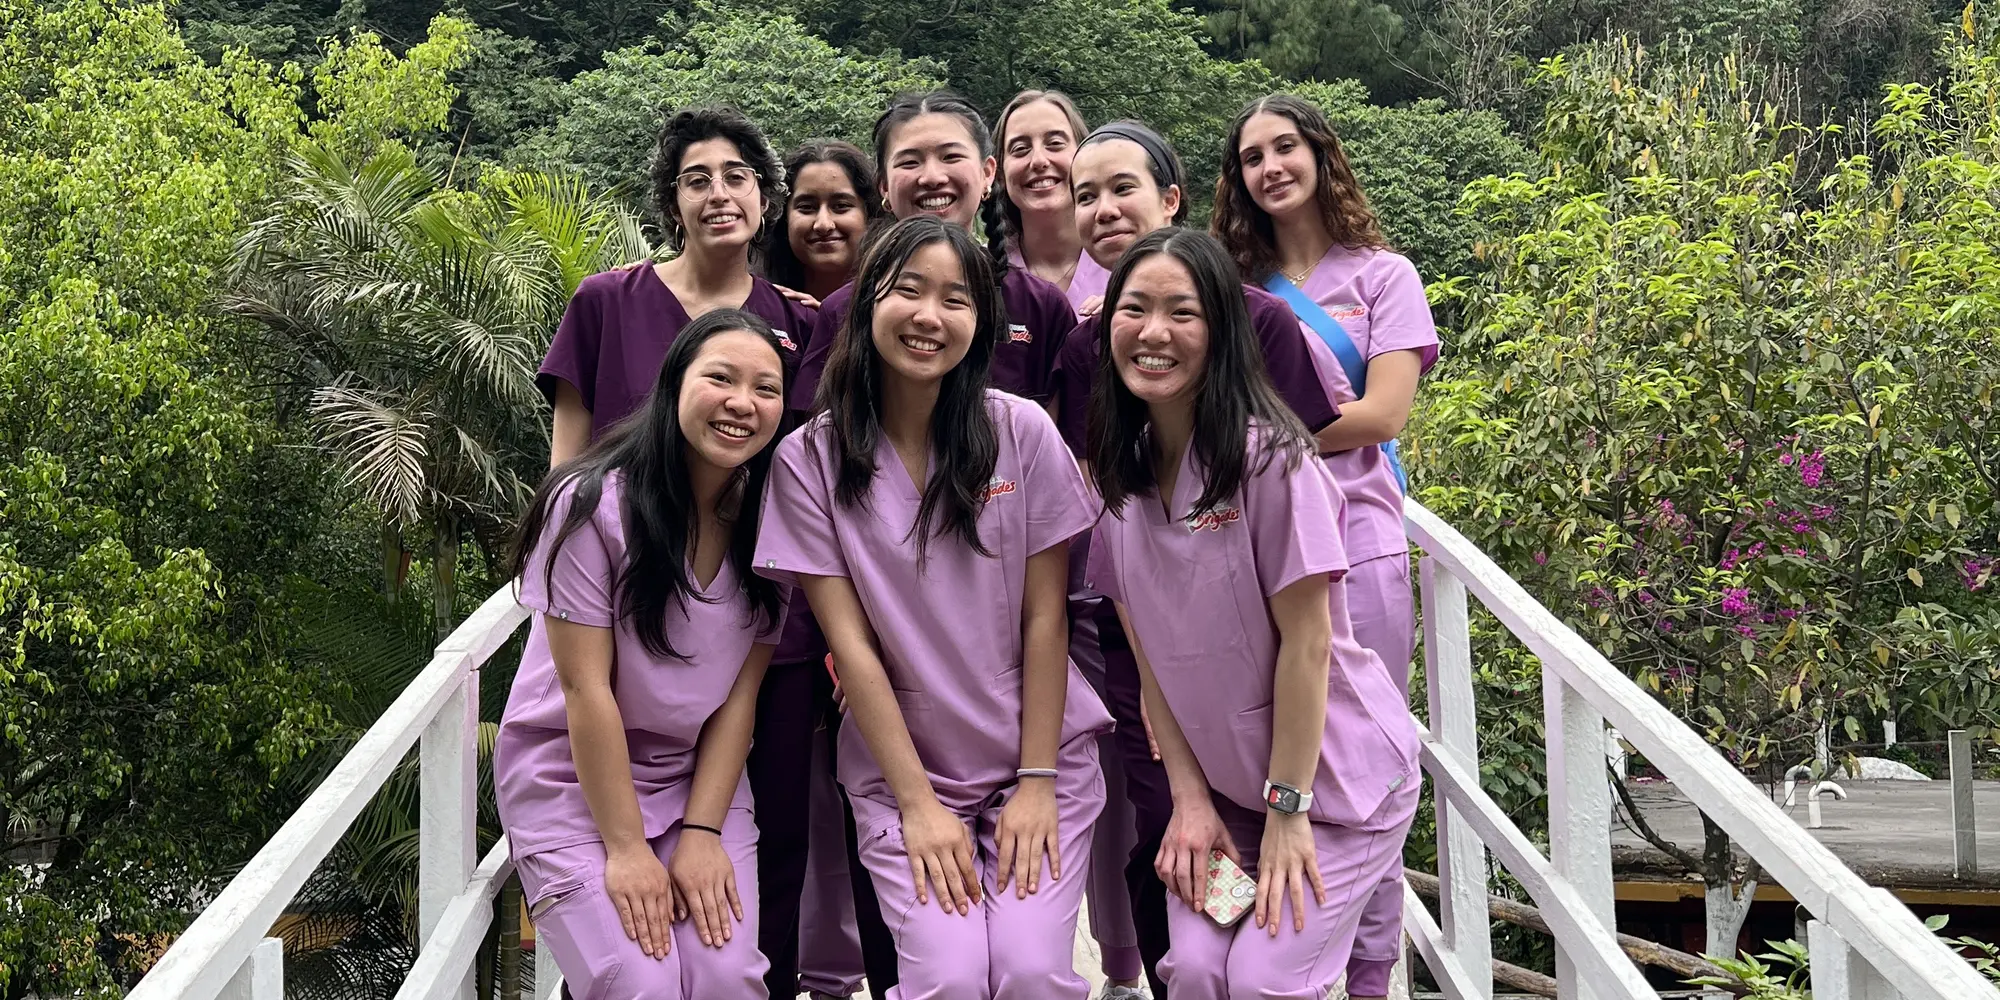 Small group of students wearing scrubs posing outdoors with trees in background